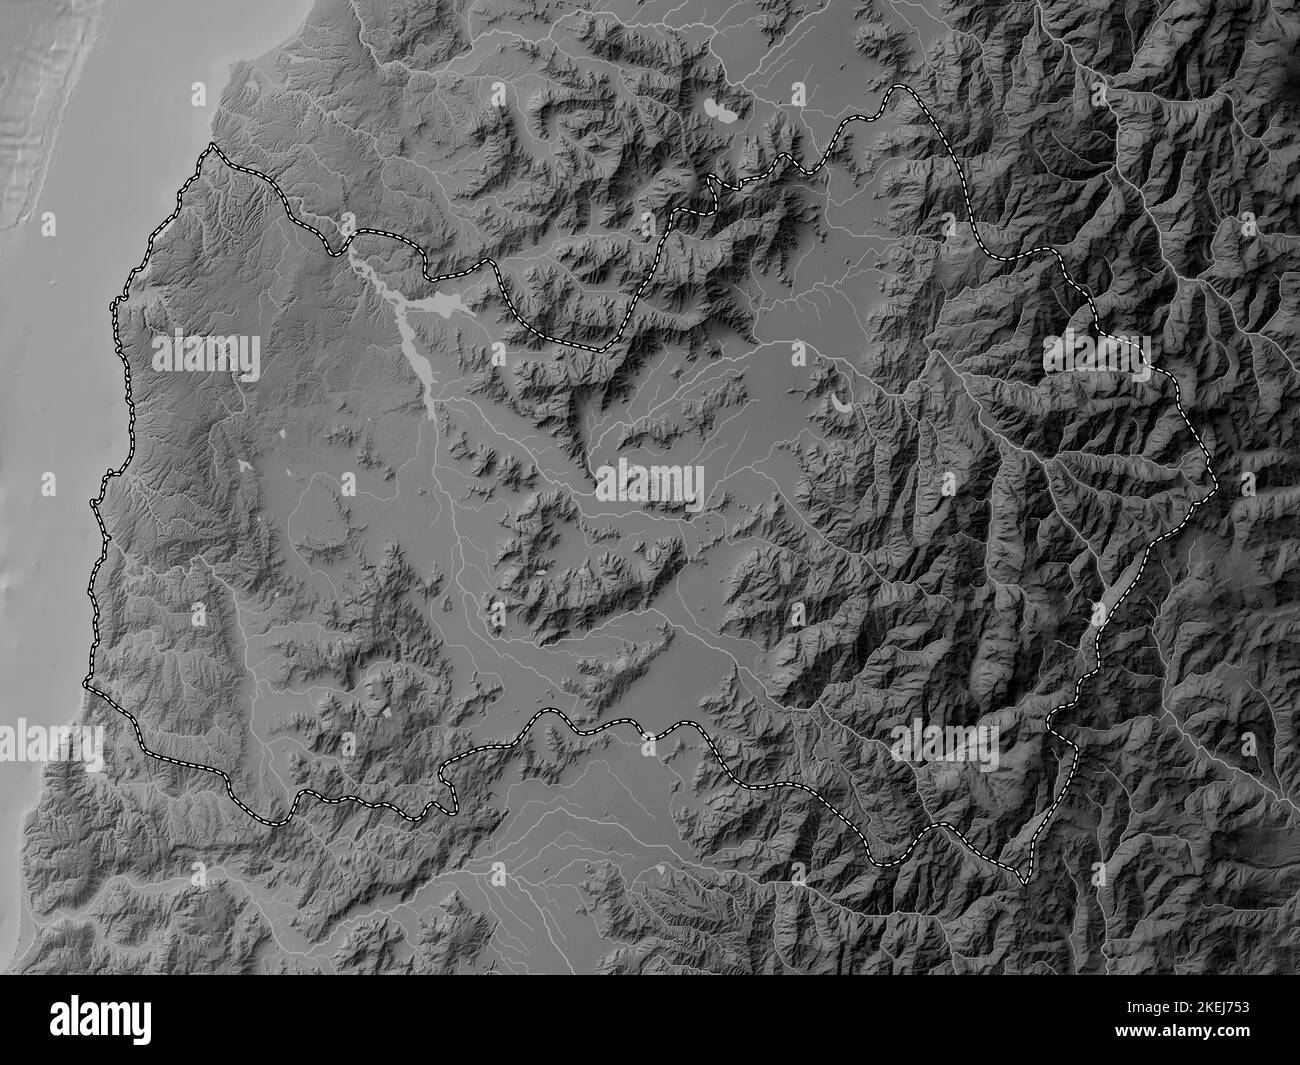 Libertador General Bernardo O'Higgins, region of Chile. Grayscale elevation map with lakes and rivers Stock Photo